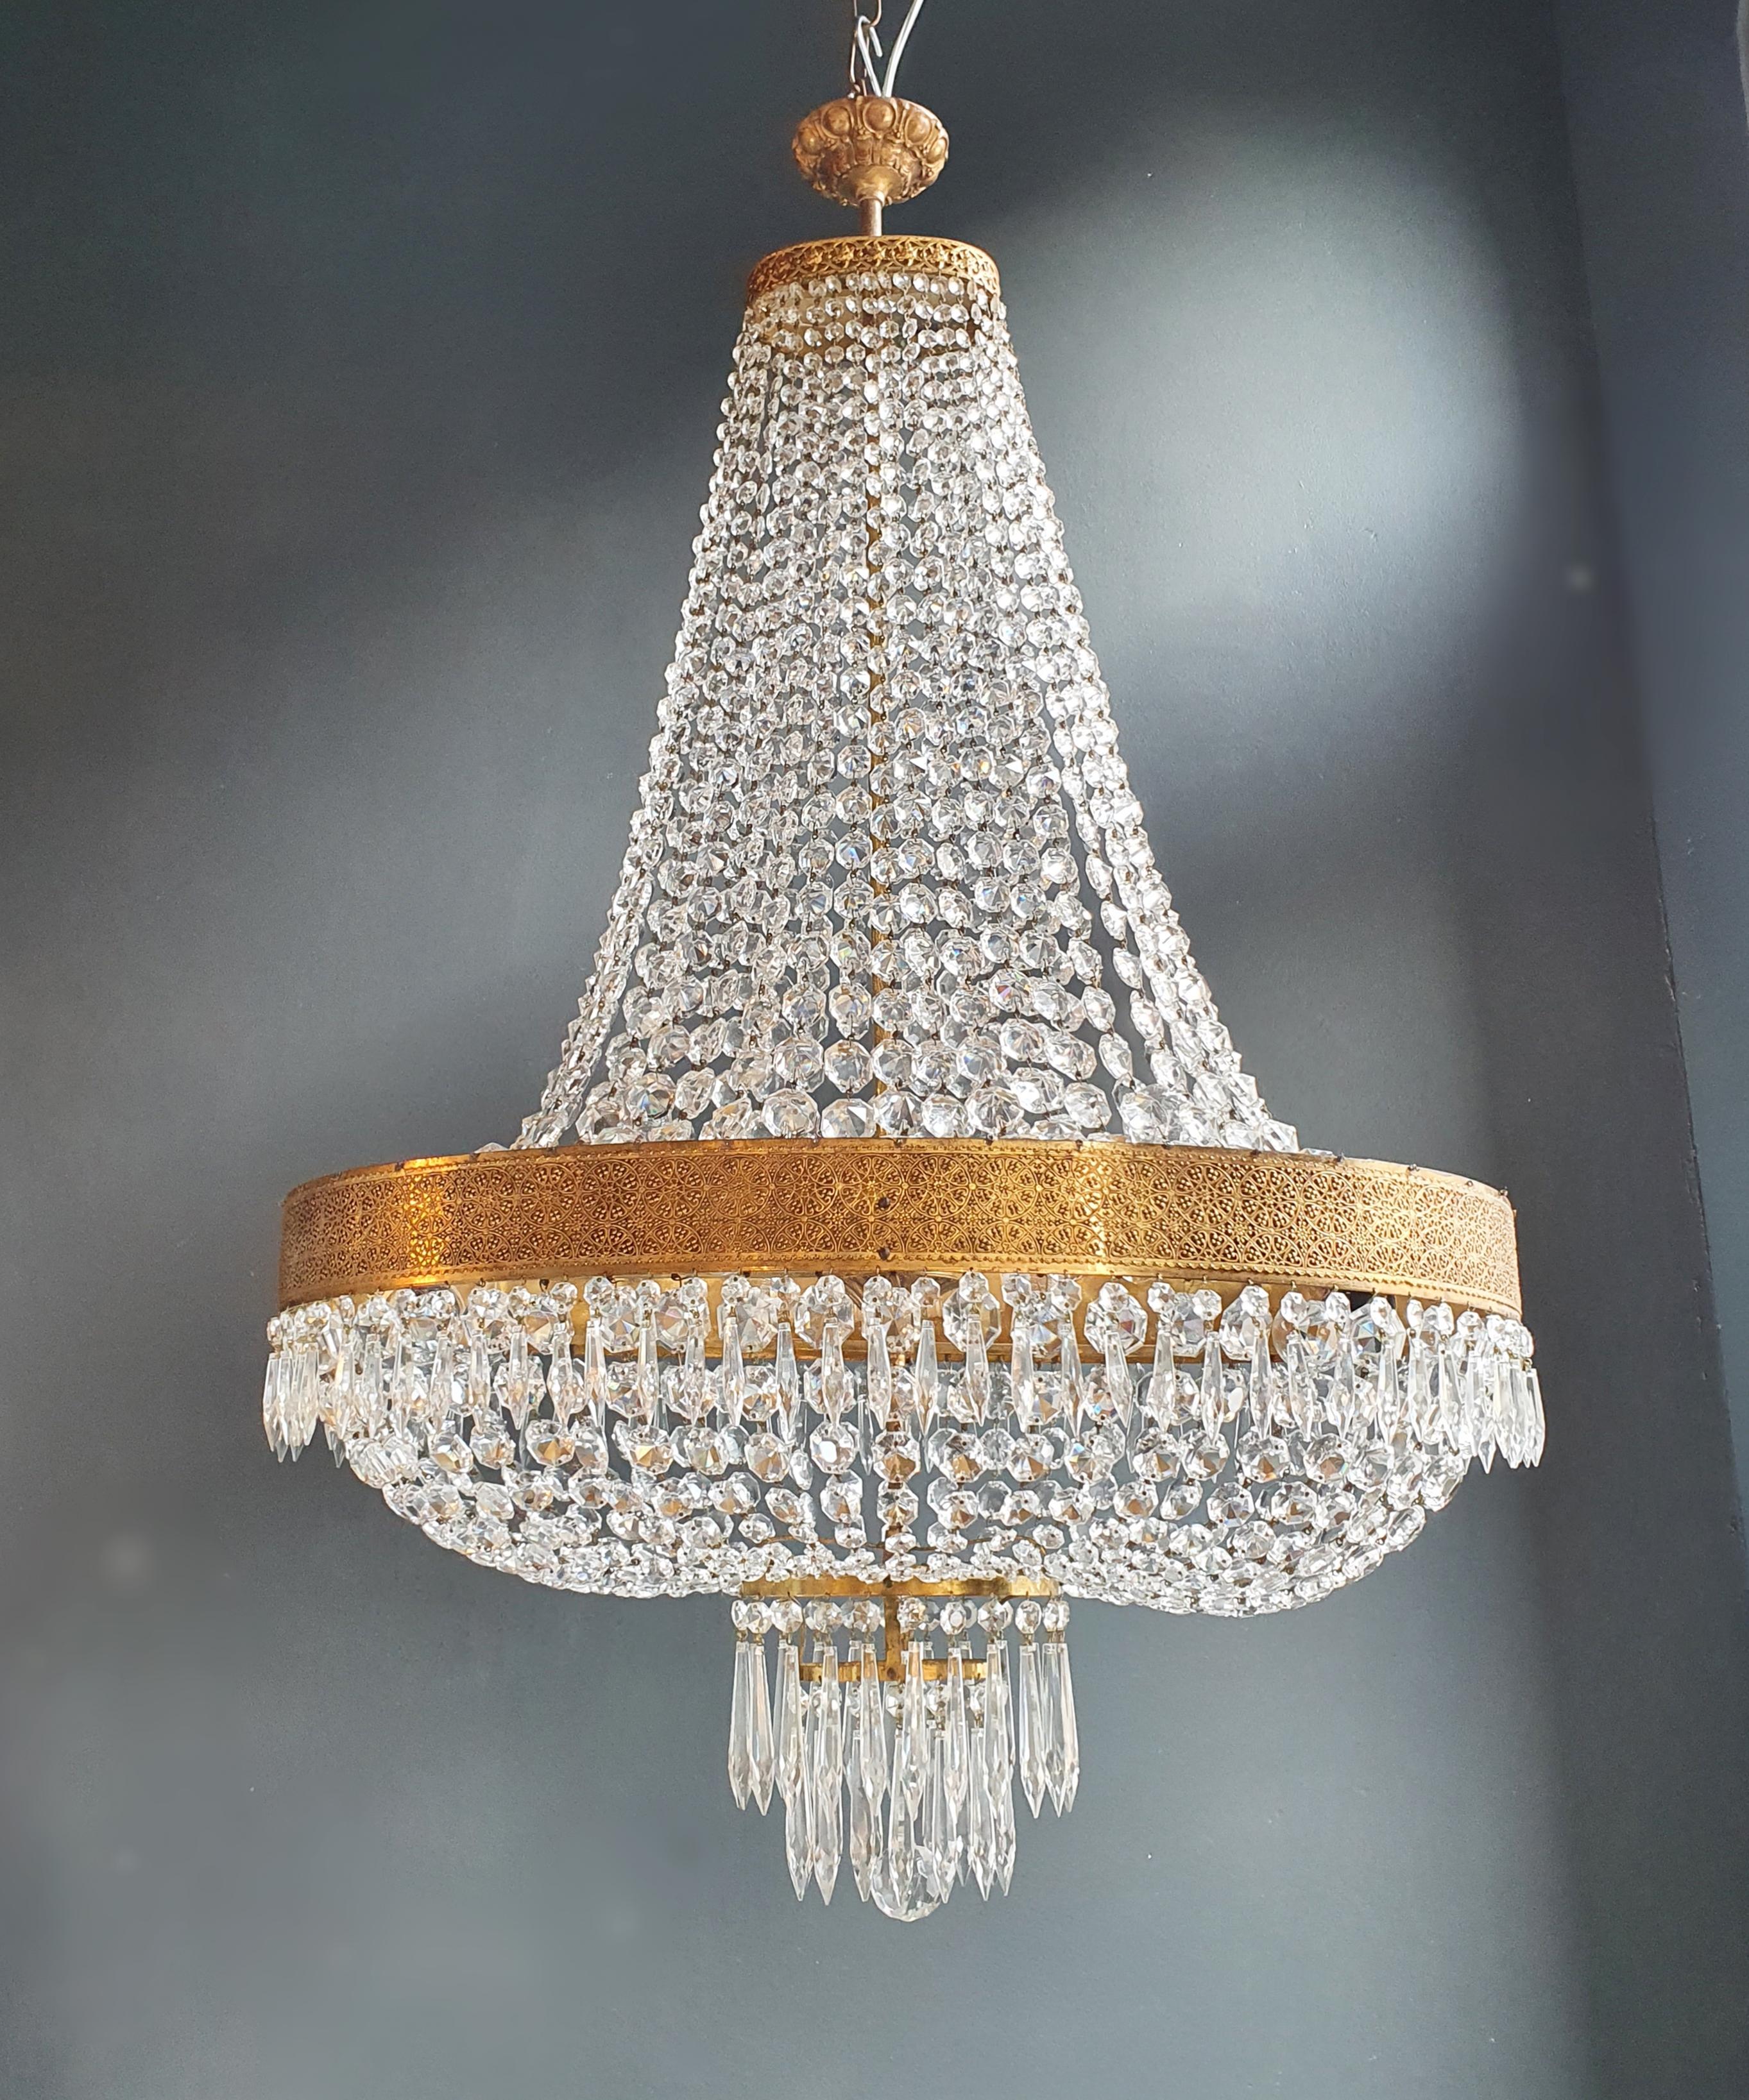 old chandelier with love and professionally restored in Berlin. electrical wiring works in the US.
Re-wired and ready to hang
not one missing
Cabling completely renewed. Crystal, hand-knotted.
Measures: Total height 140 cm, height without chain: 110